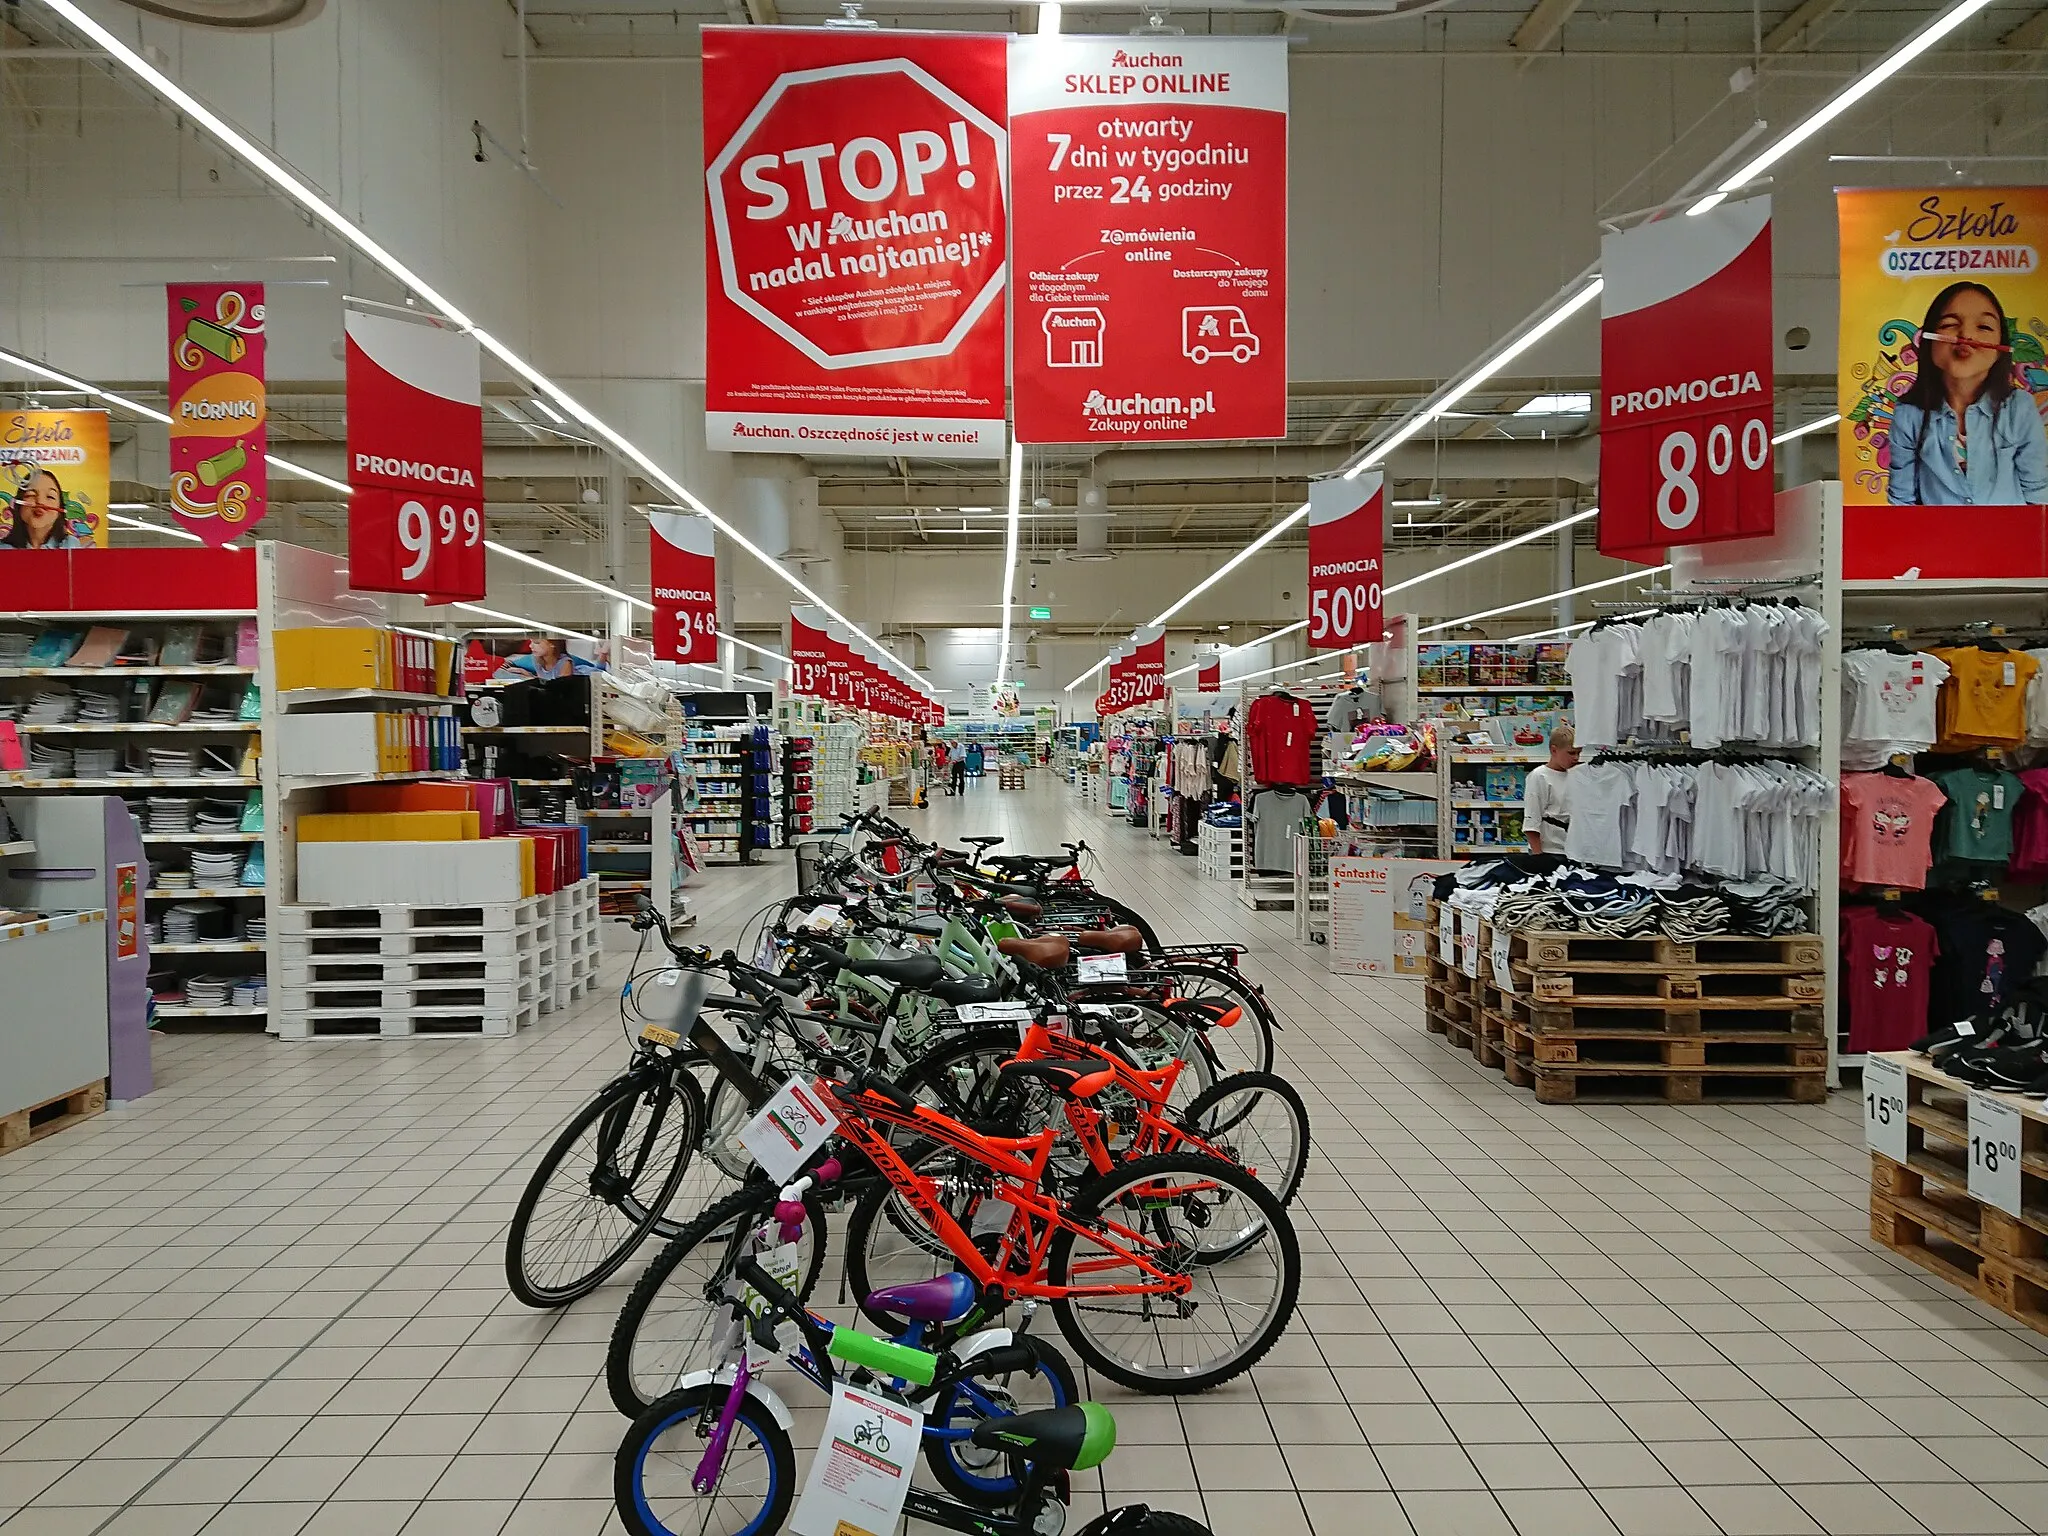 Photo showing: Interiors of Auchan superstore in Riviera Mall, Gdynia, Poland. Central aisle with some bicycles in the front.